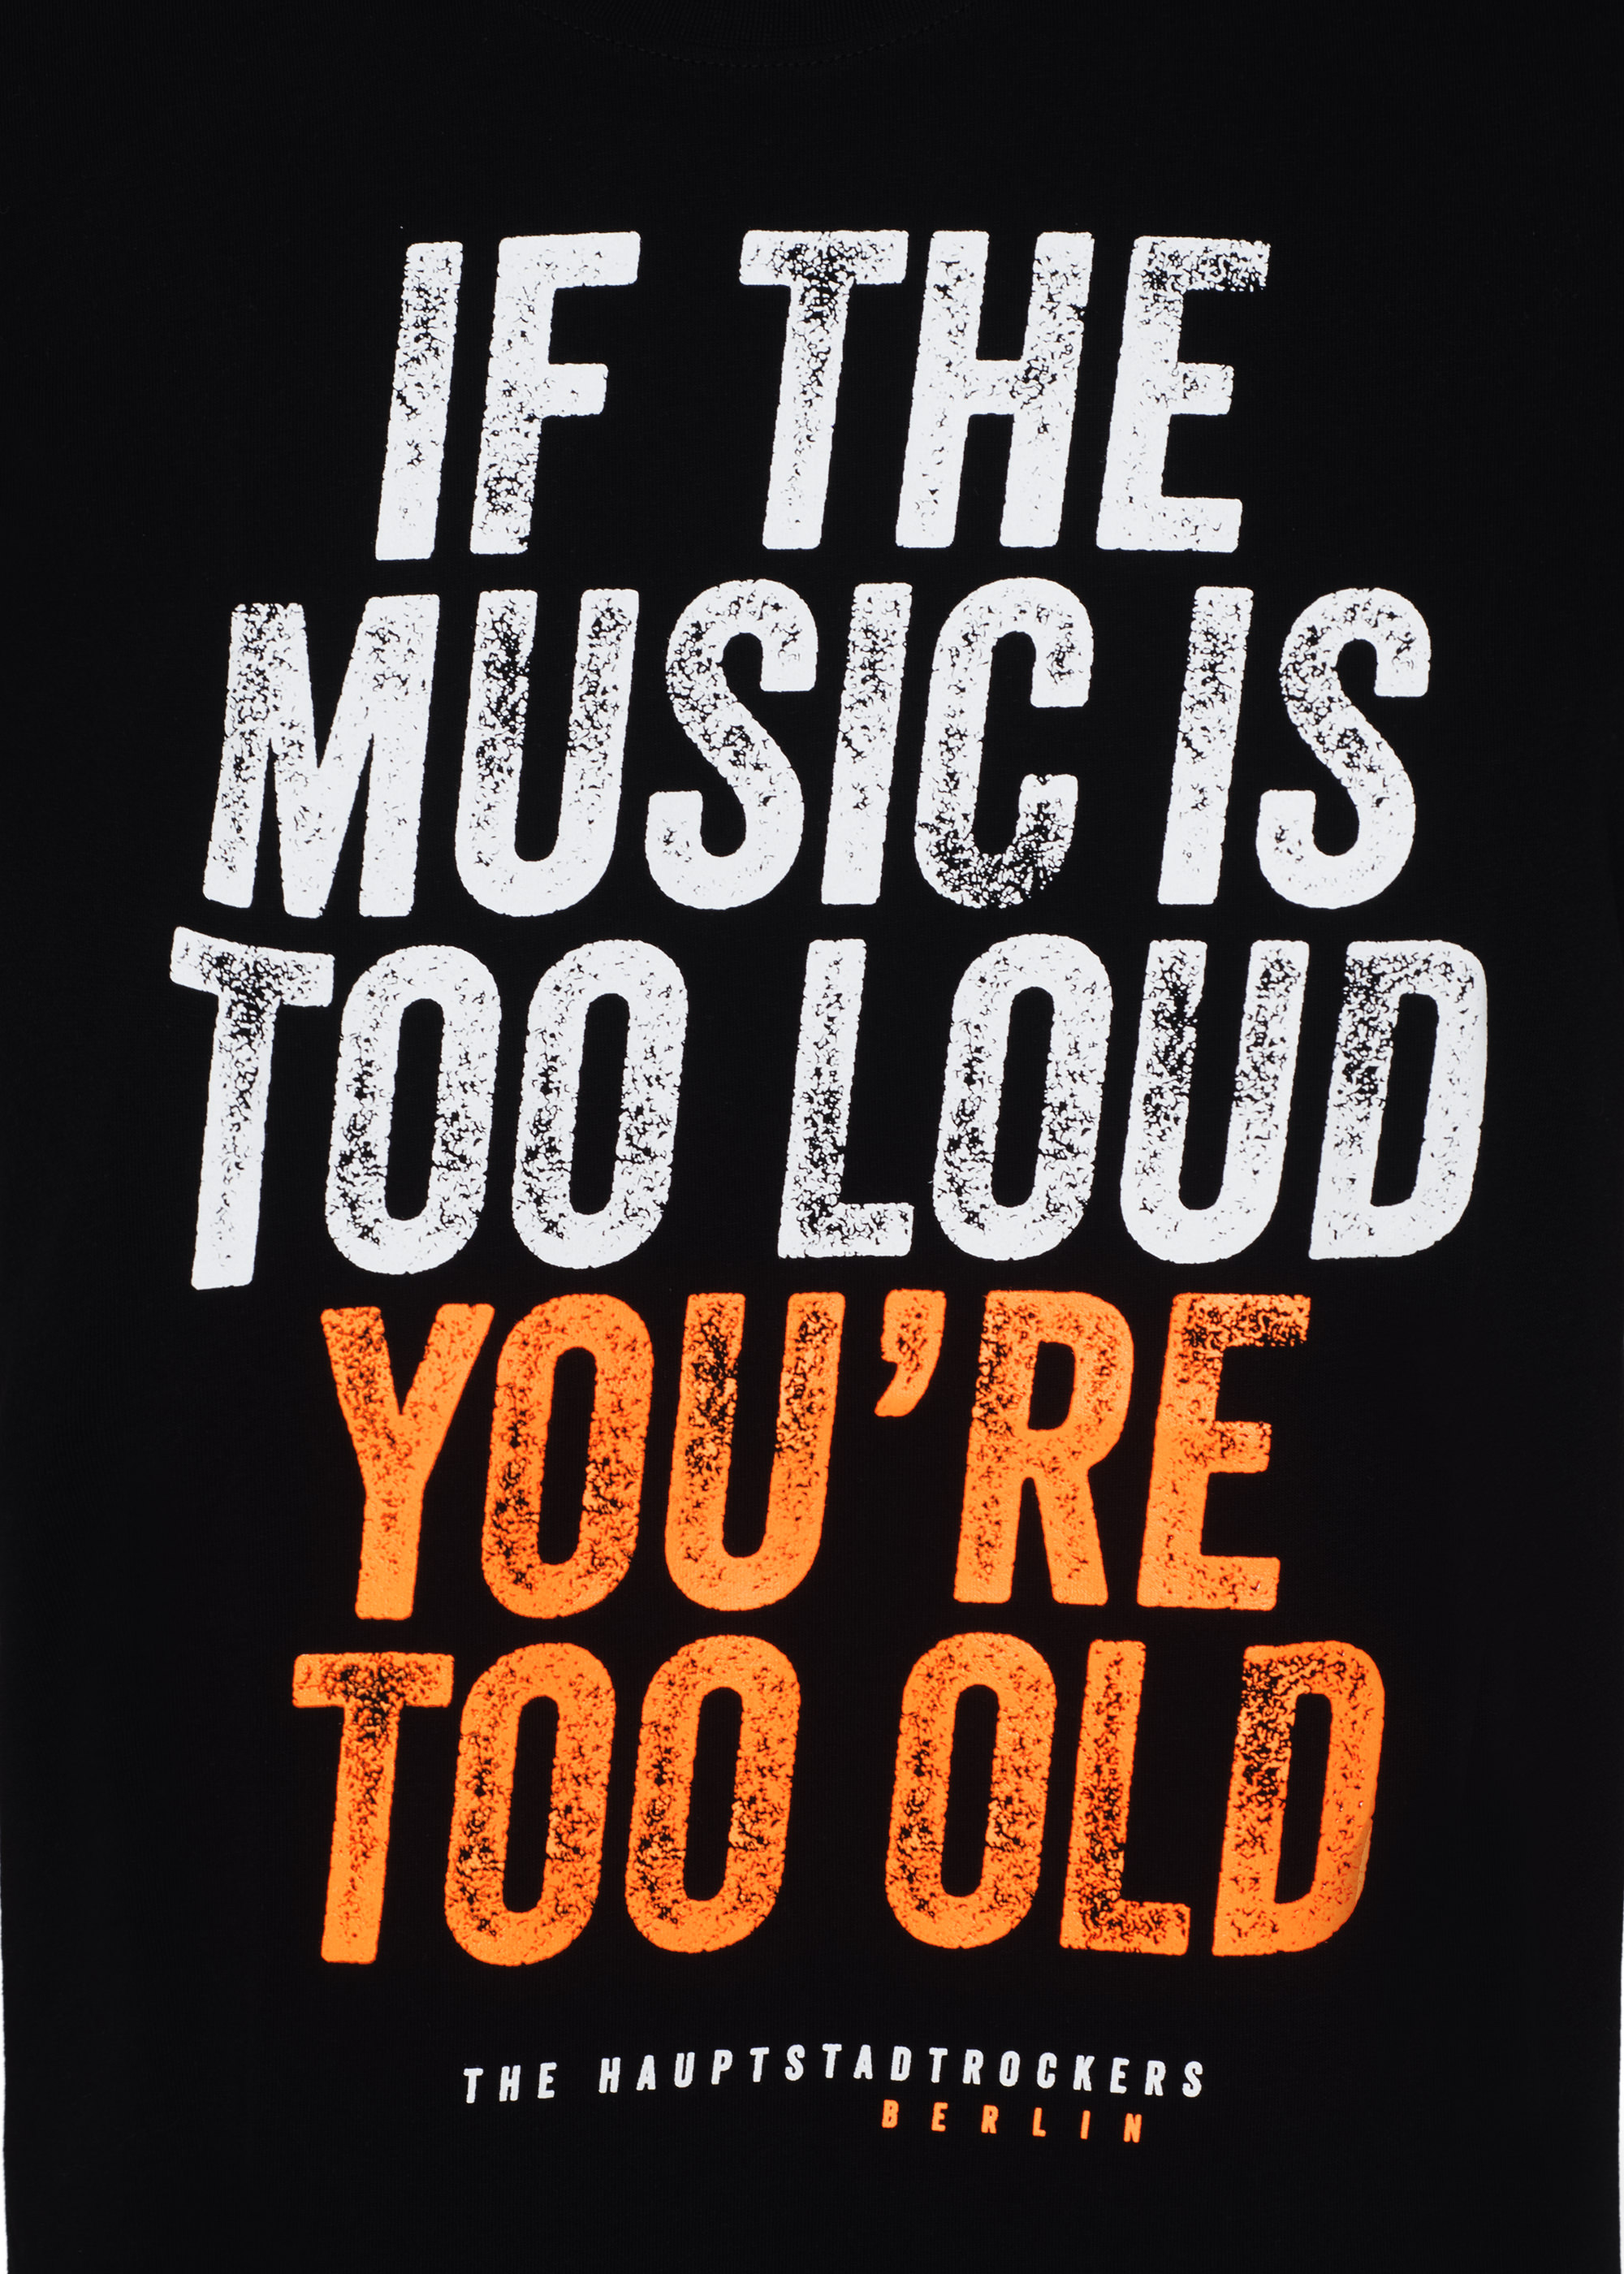 If the music is too loud Shirt